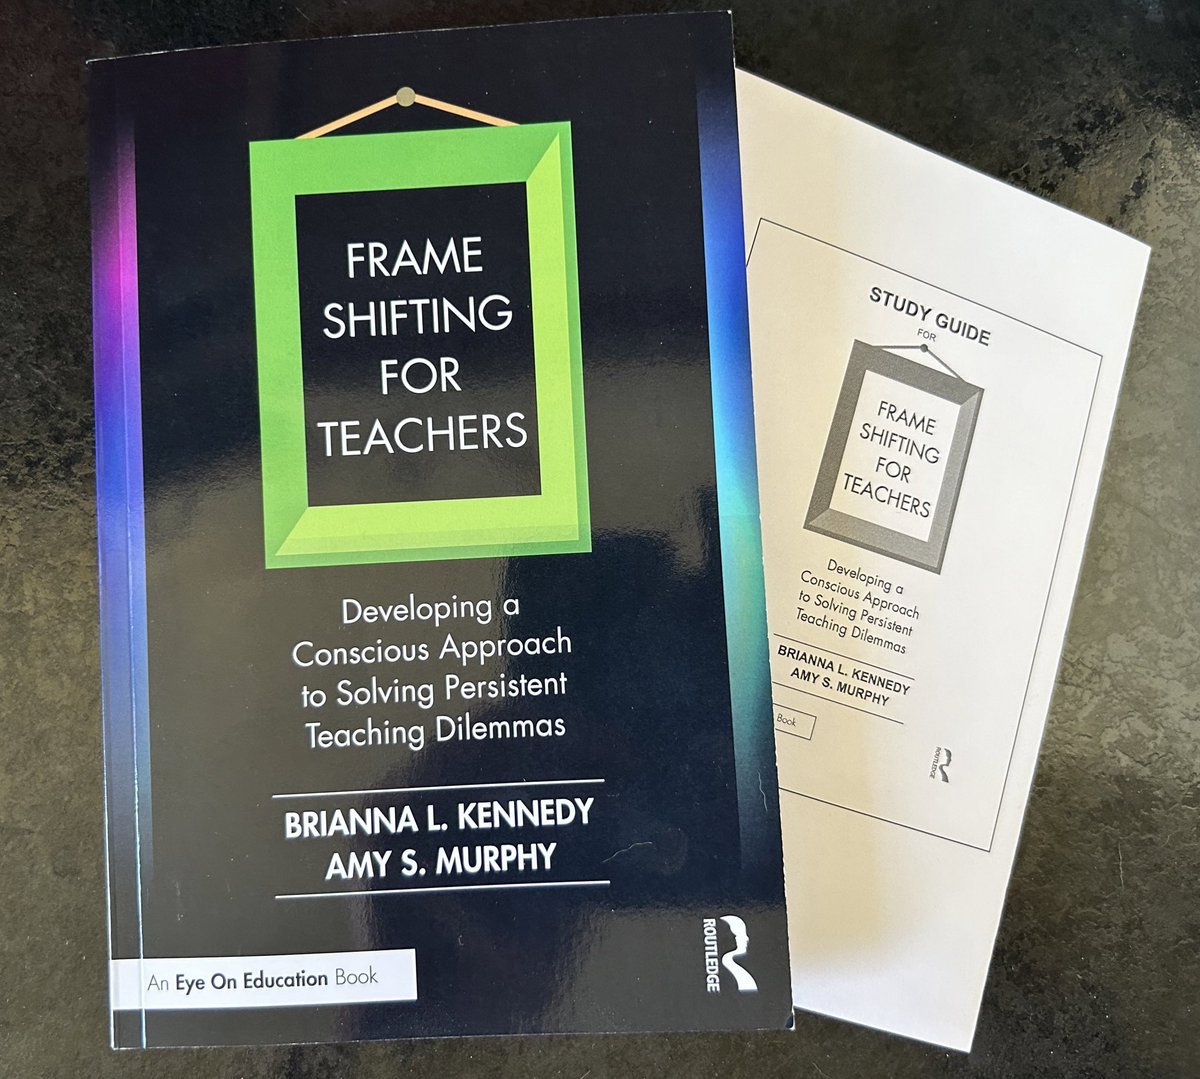 Thank you Professor Brianna Kennedy @UofGEducation for the copies of your book that was published this week. A fabulous resource that we look forward to exploring with you on our RPP @EdISGlasgow #FrameShifting #TeacherLeadership #Partnership @MrsWrightHT @CDavren